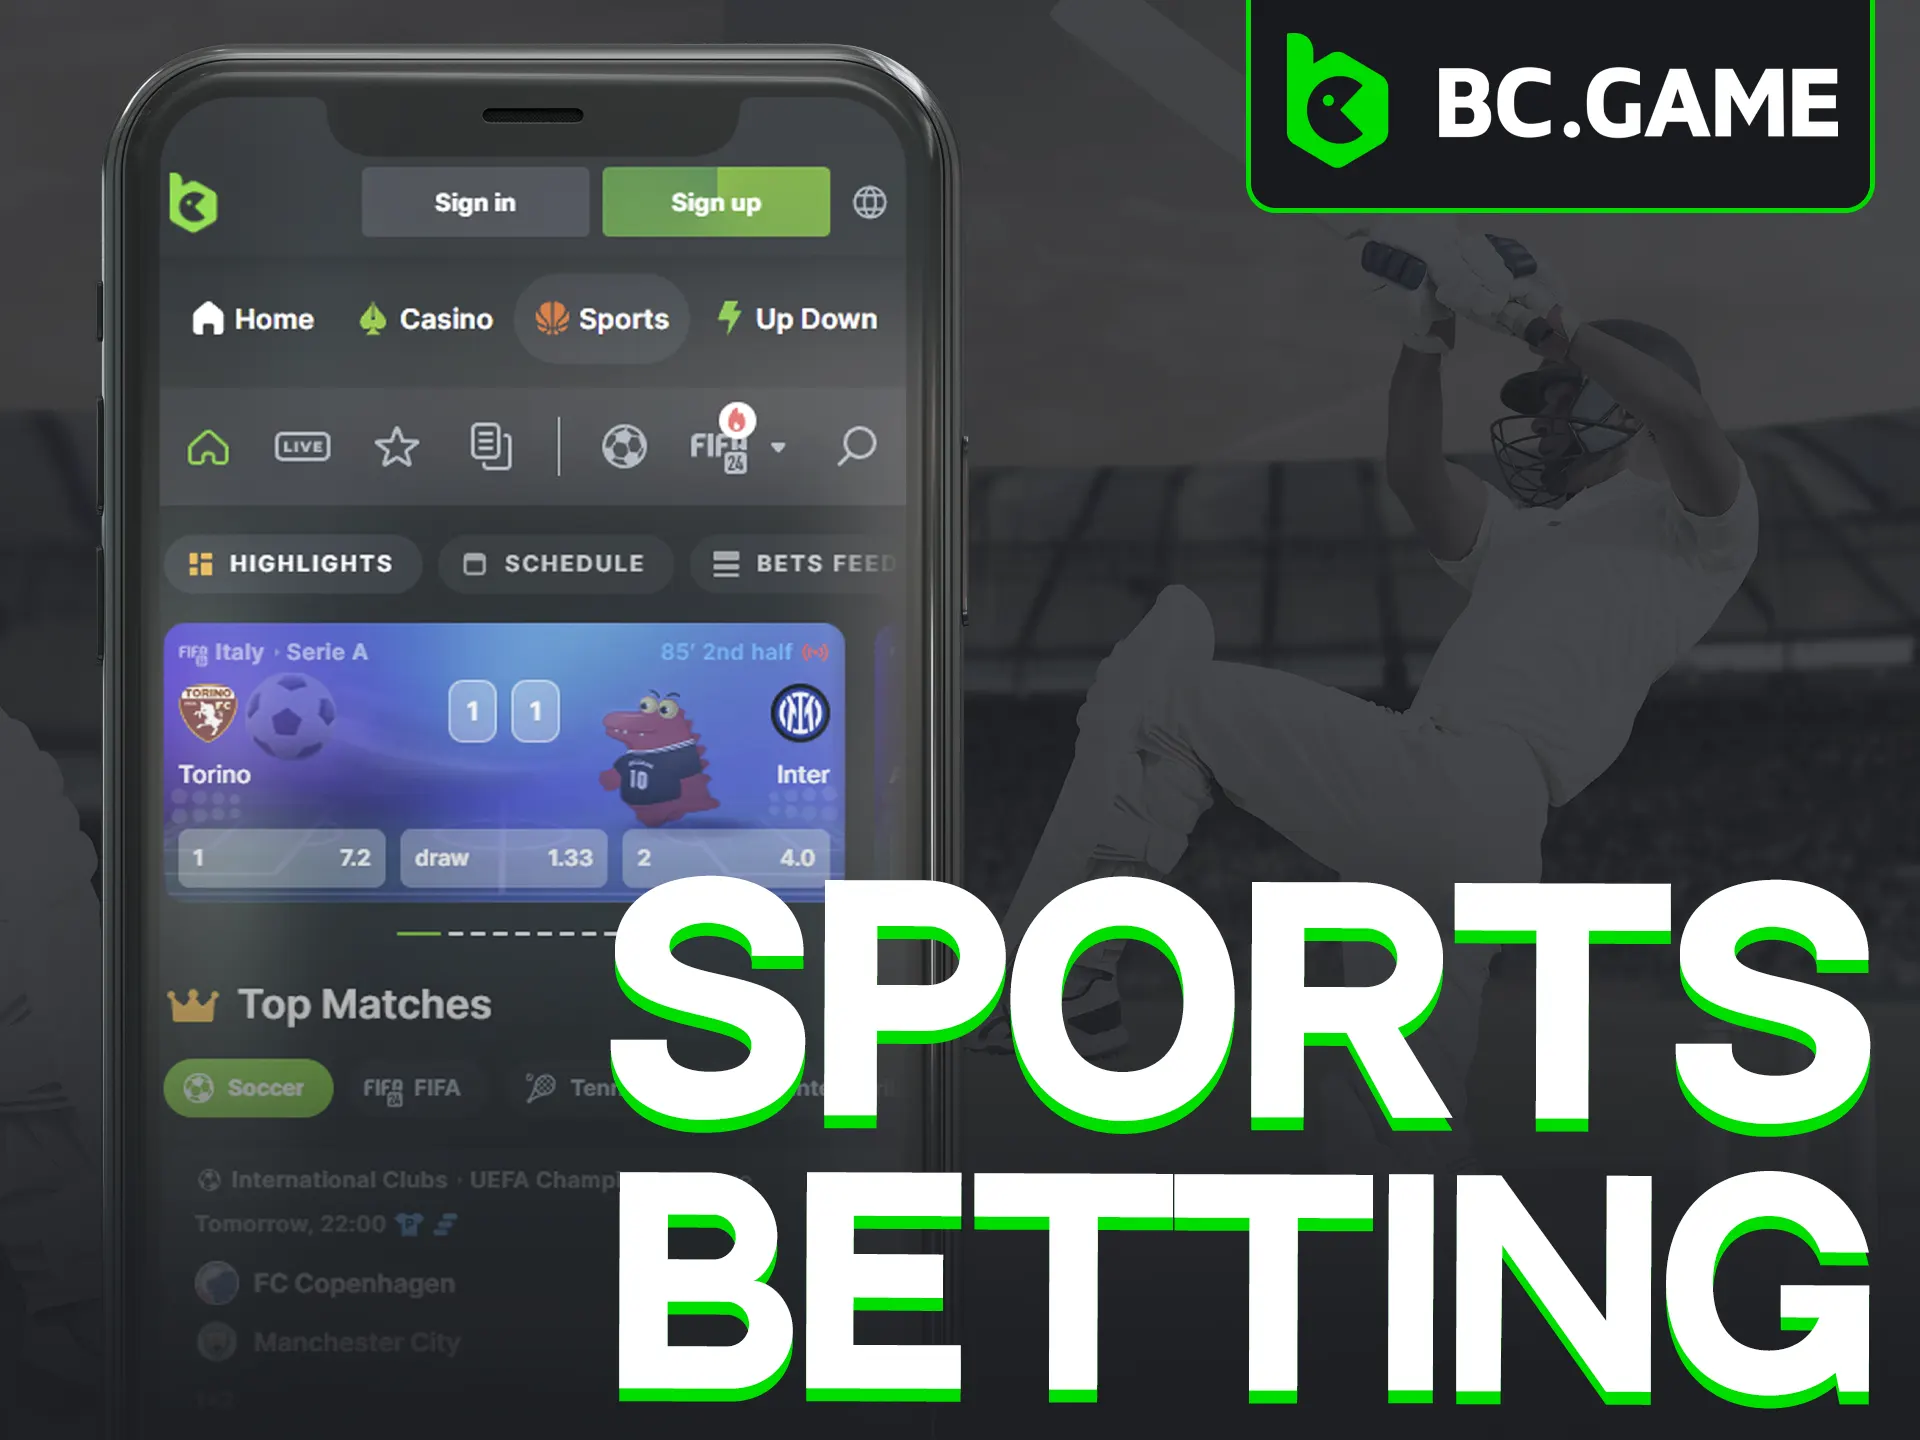 BC Game App offers wide sports betting options.